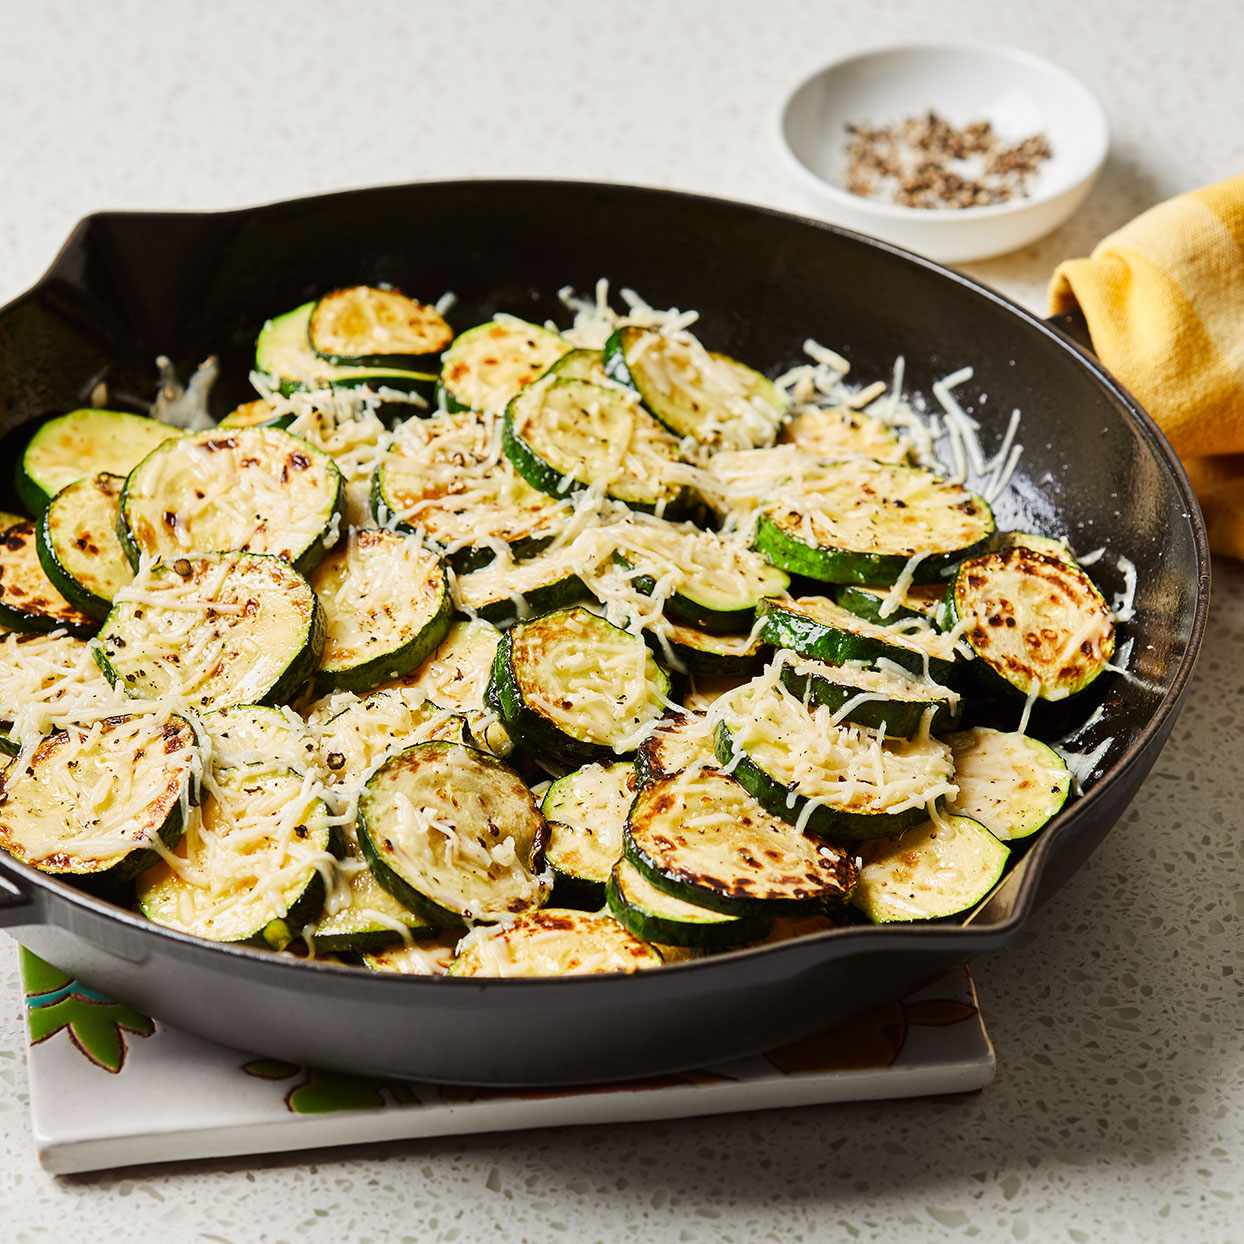 Mary's Zucchini with Parmesan 